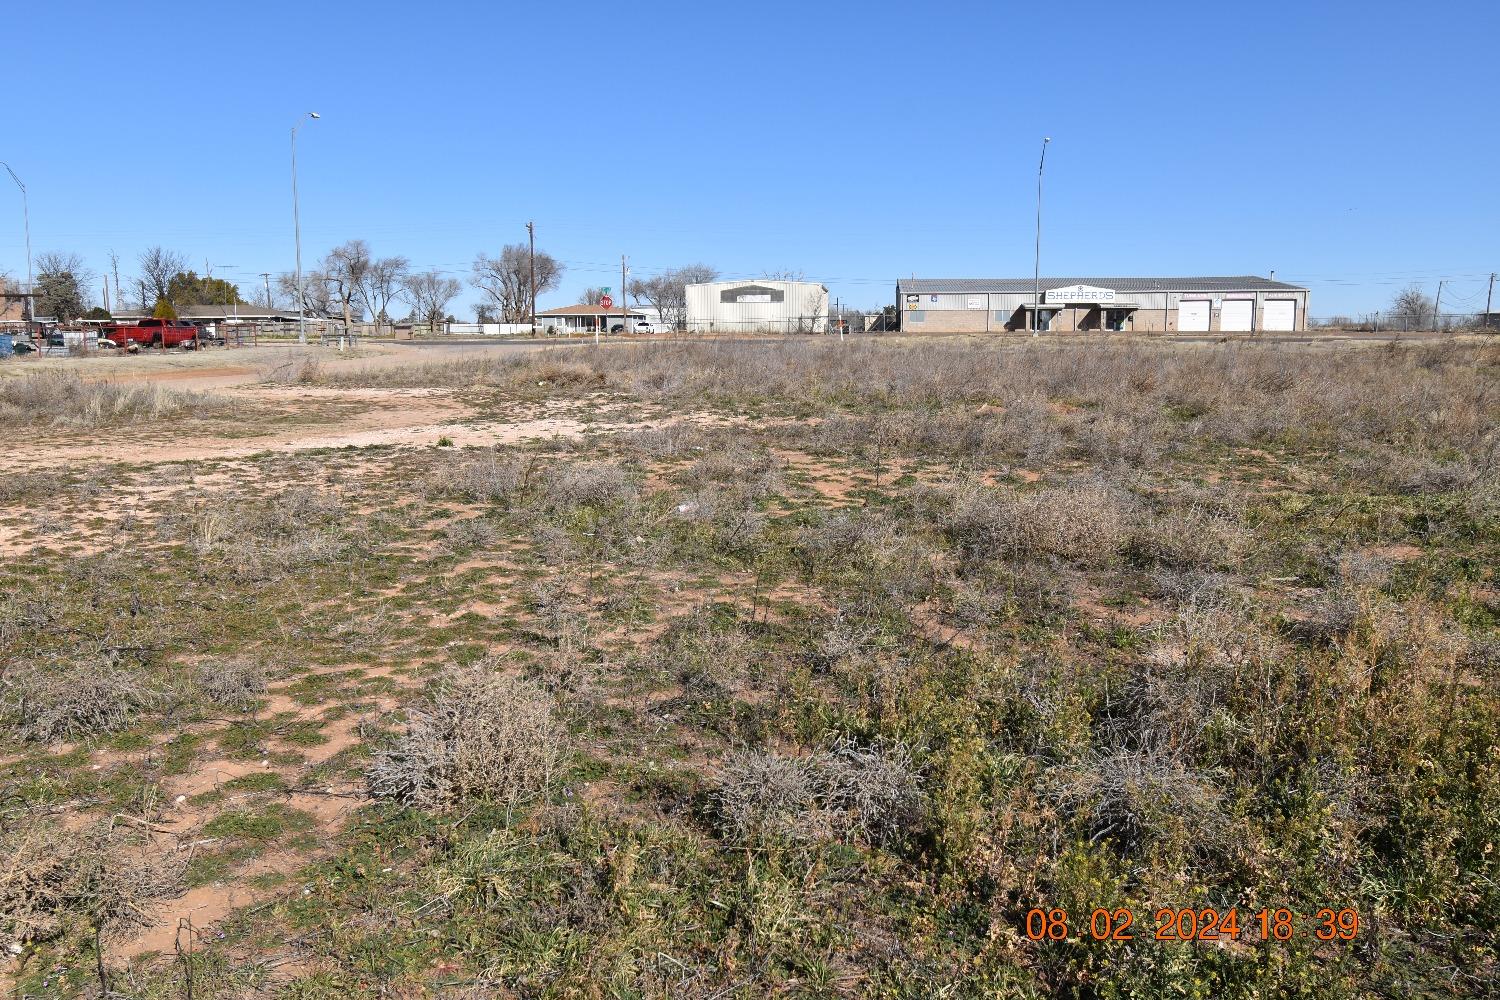 1.46 acre corner lot, cleared and ready for construction, between two residential areas currently under construction  and existing multi-family and single family residential housing. City water available at the north boundary of the lot. Seller will subdivide.